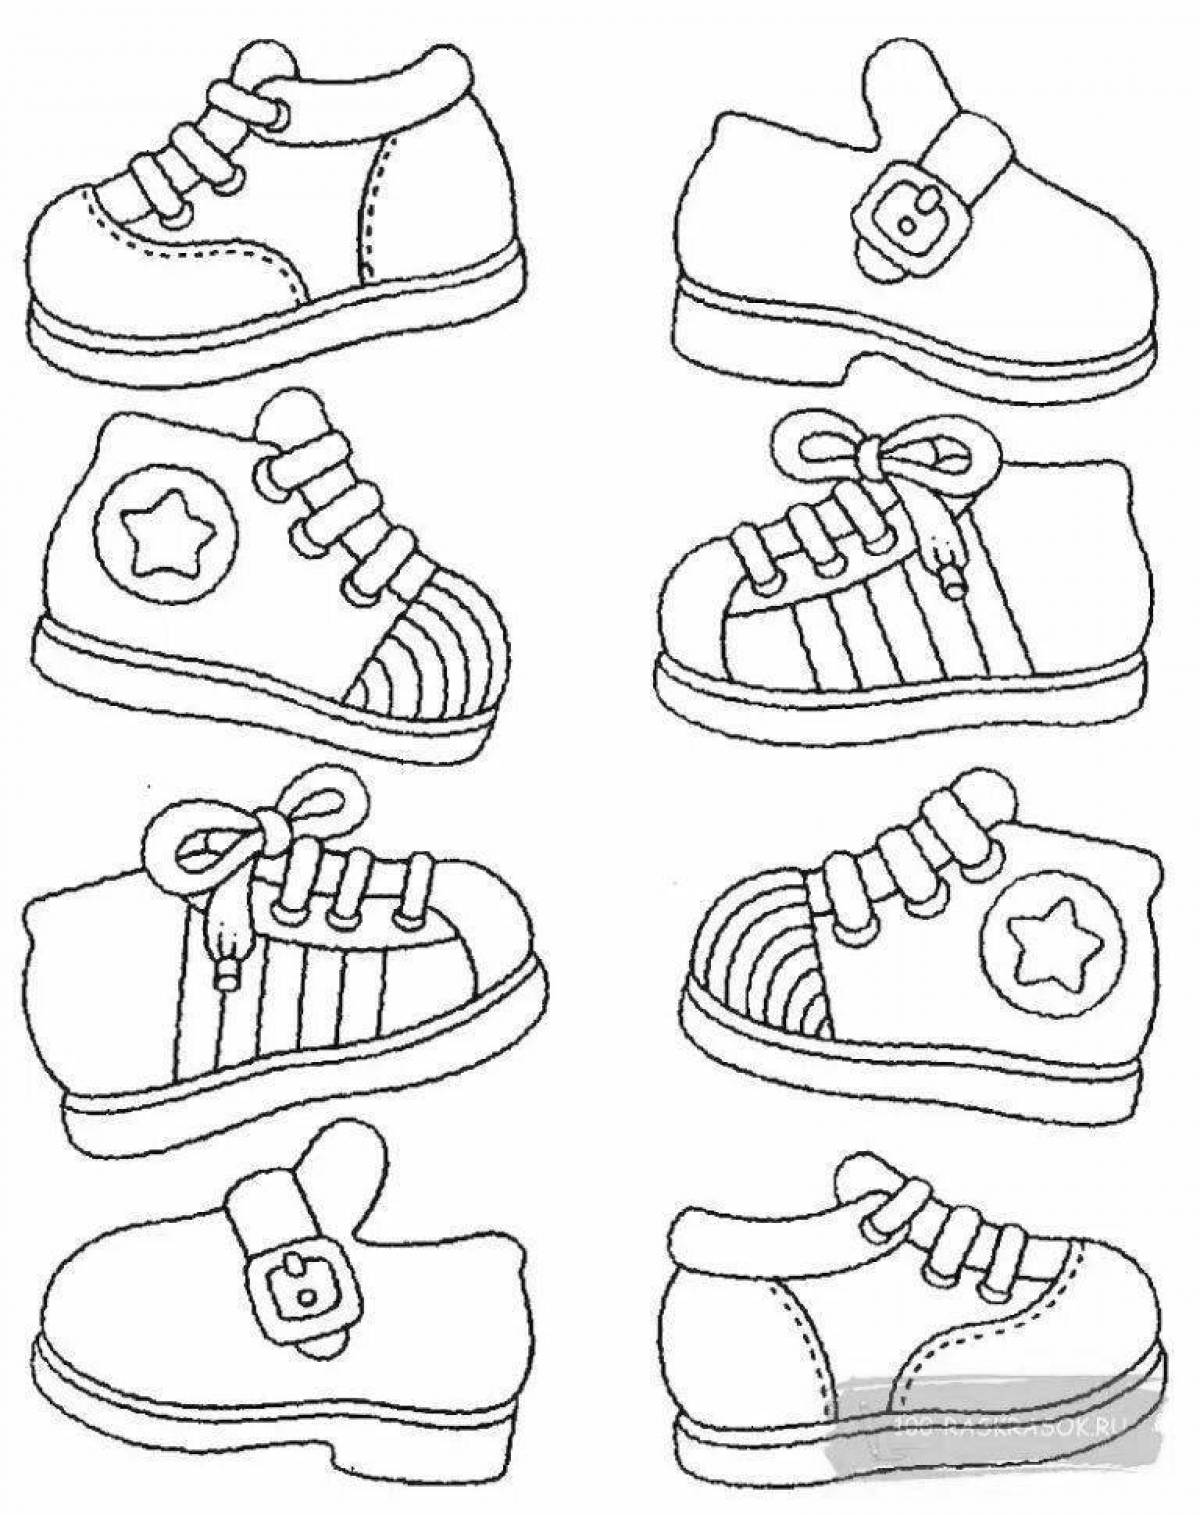 A fun shoe coloring book for 5-6 year olds